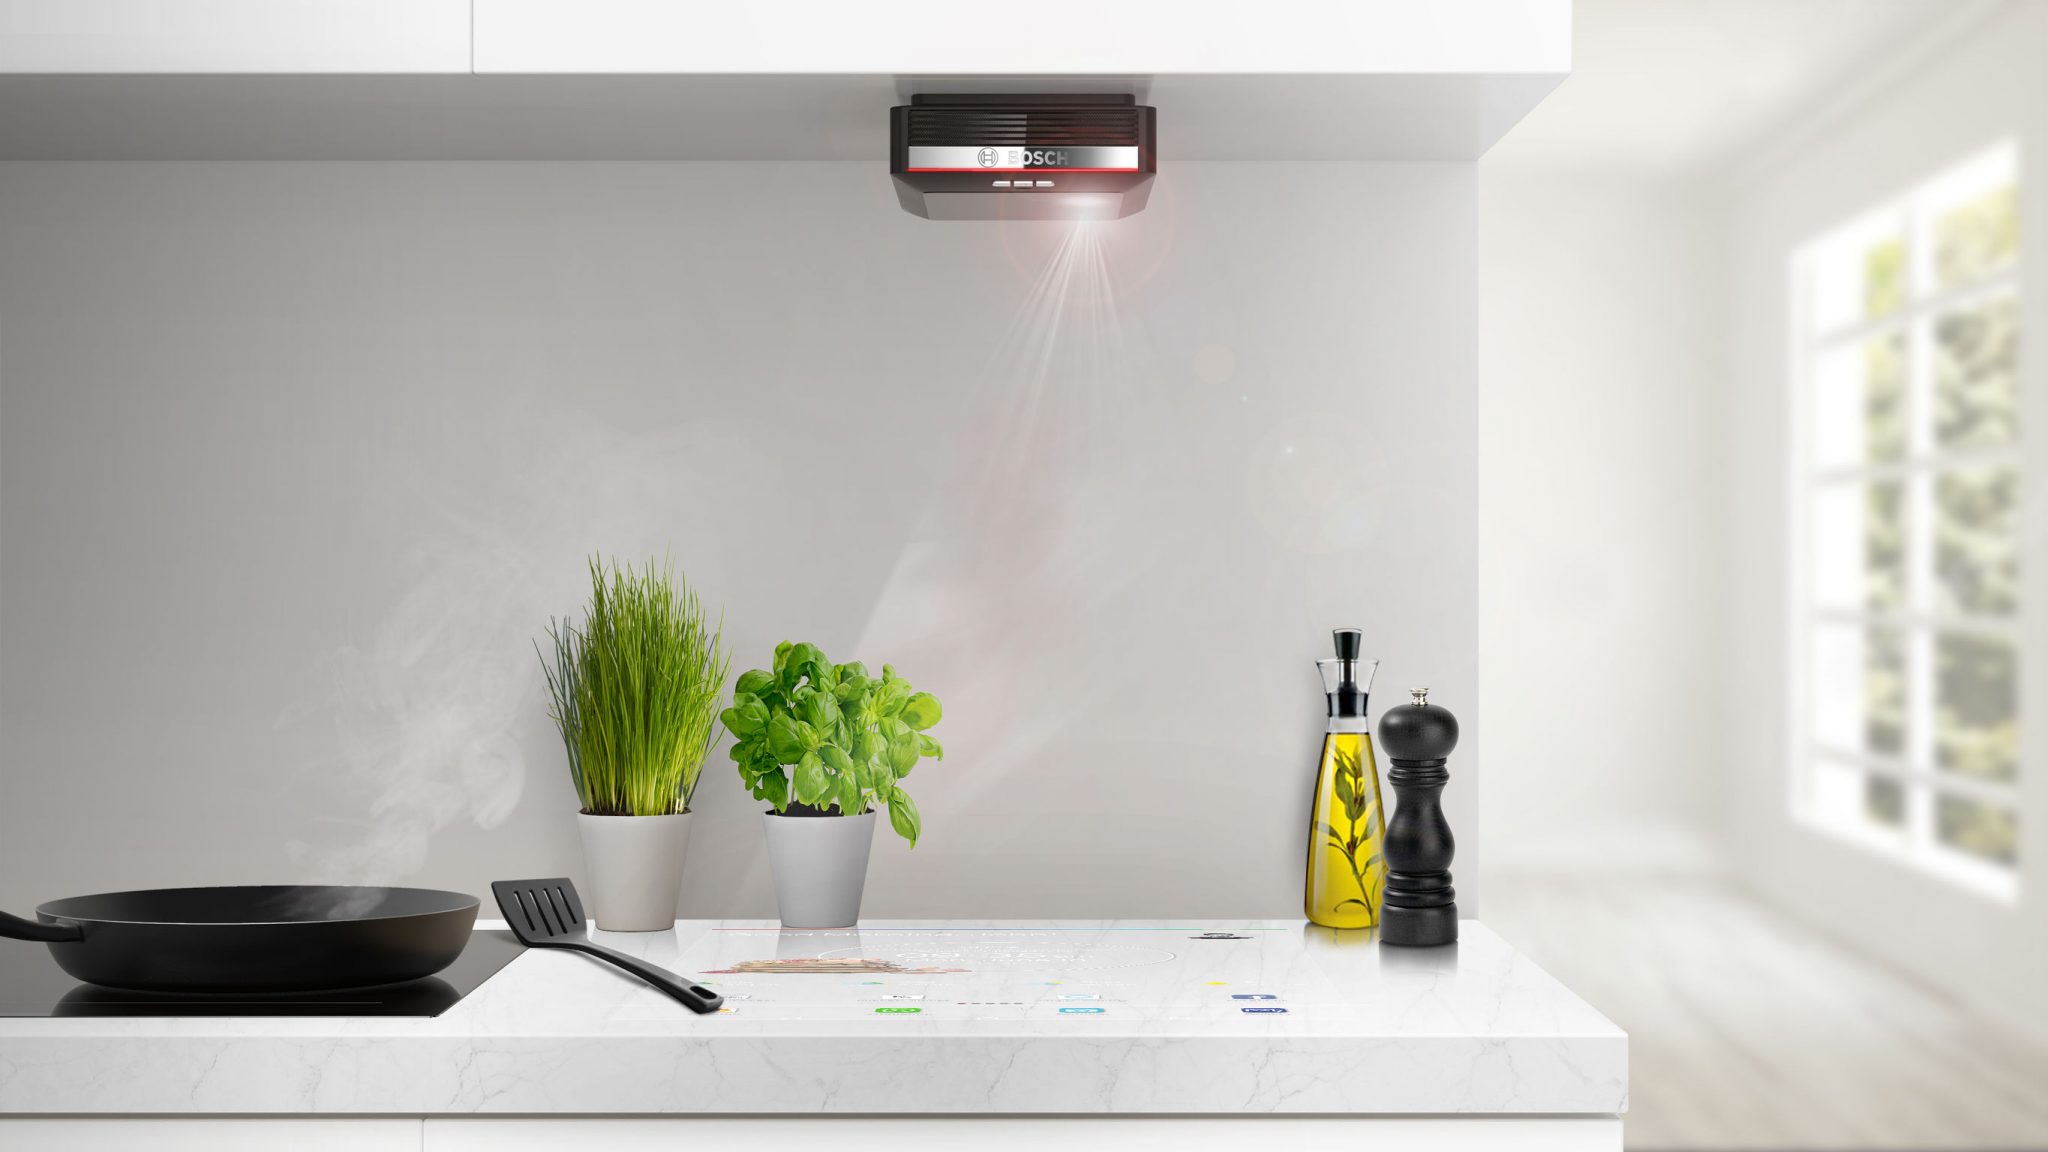 BJF Joinery countertop projector in smart kitchen of the future